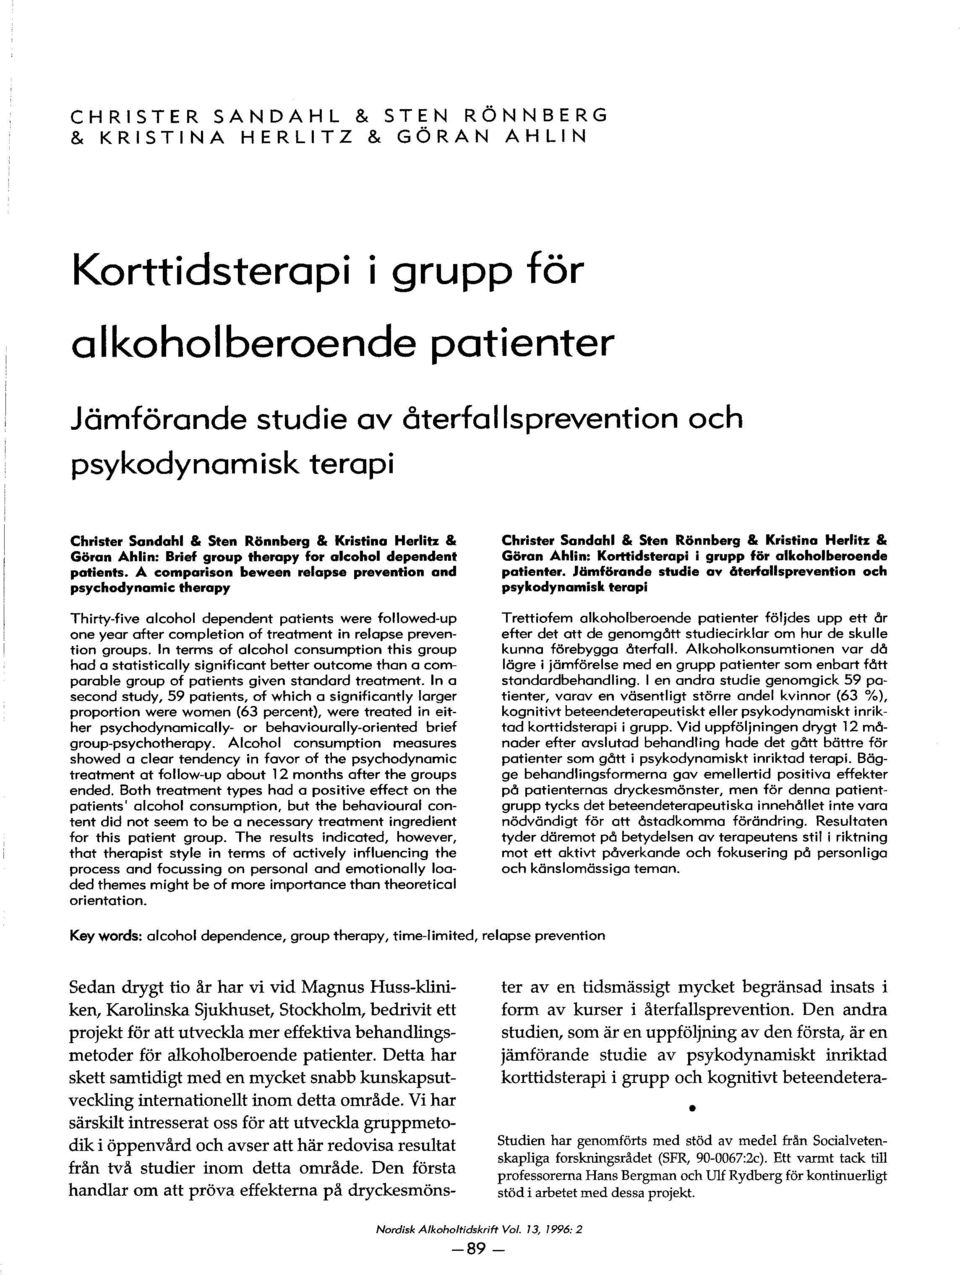 A com pari son beween relapse prevention and psychodynamlc therapy Thirty-five alcohol dependent patients were followed-up one year after completion of treatment in relapse prevention groups.